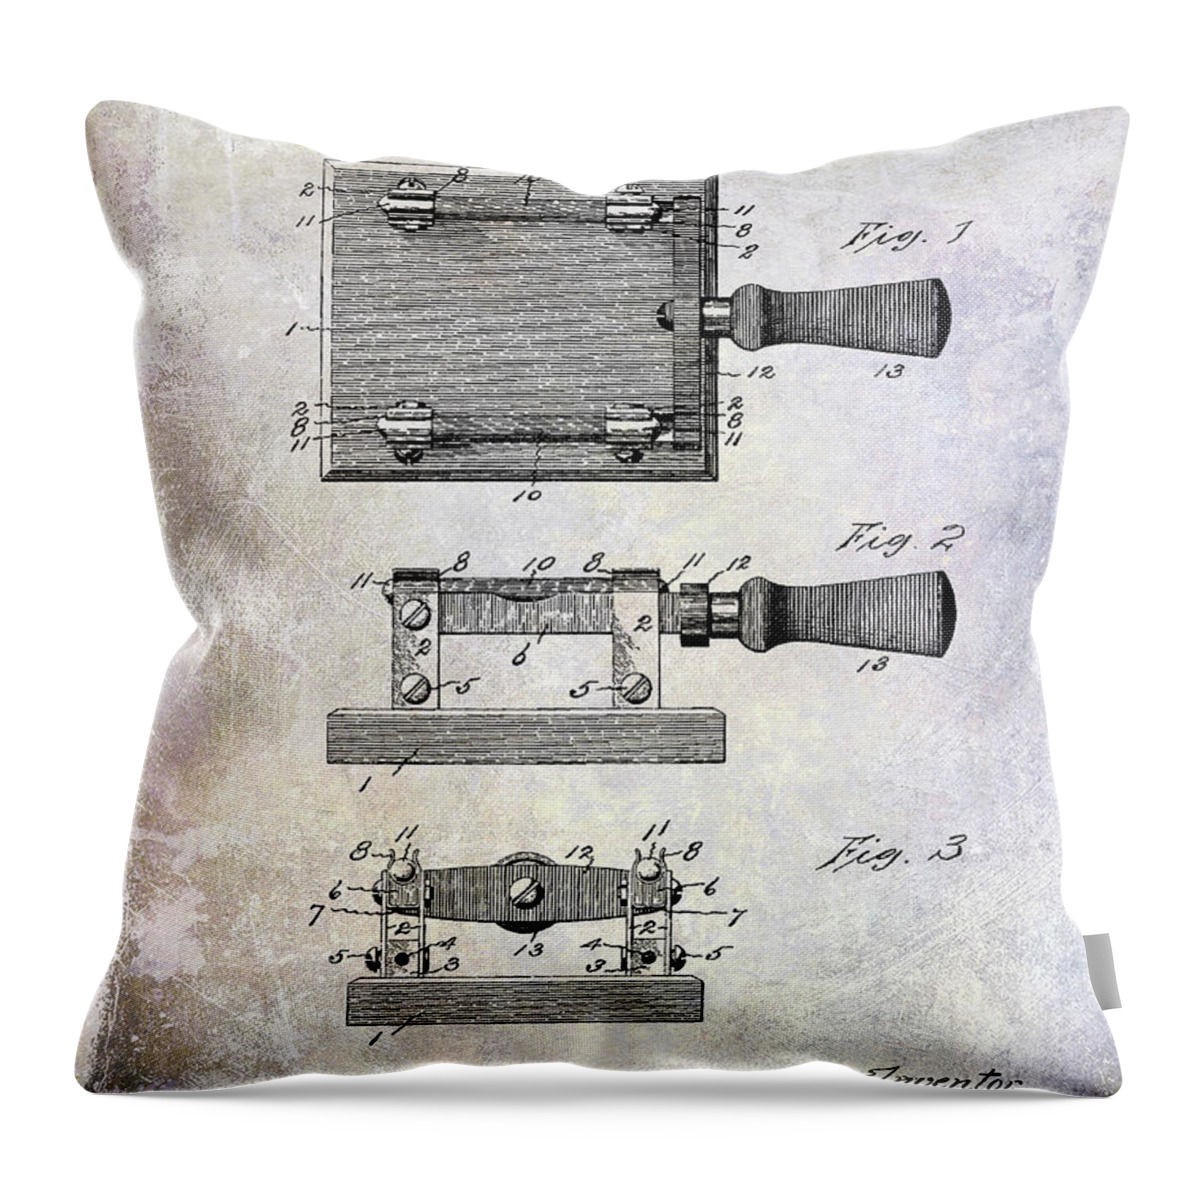 1900 Knife Switch Patent Throw Pillow featuring the photograph 1900 Knife Switch Patent by Jon Neidert